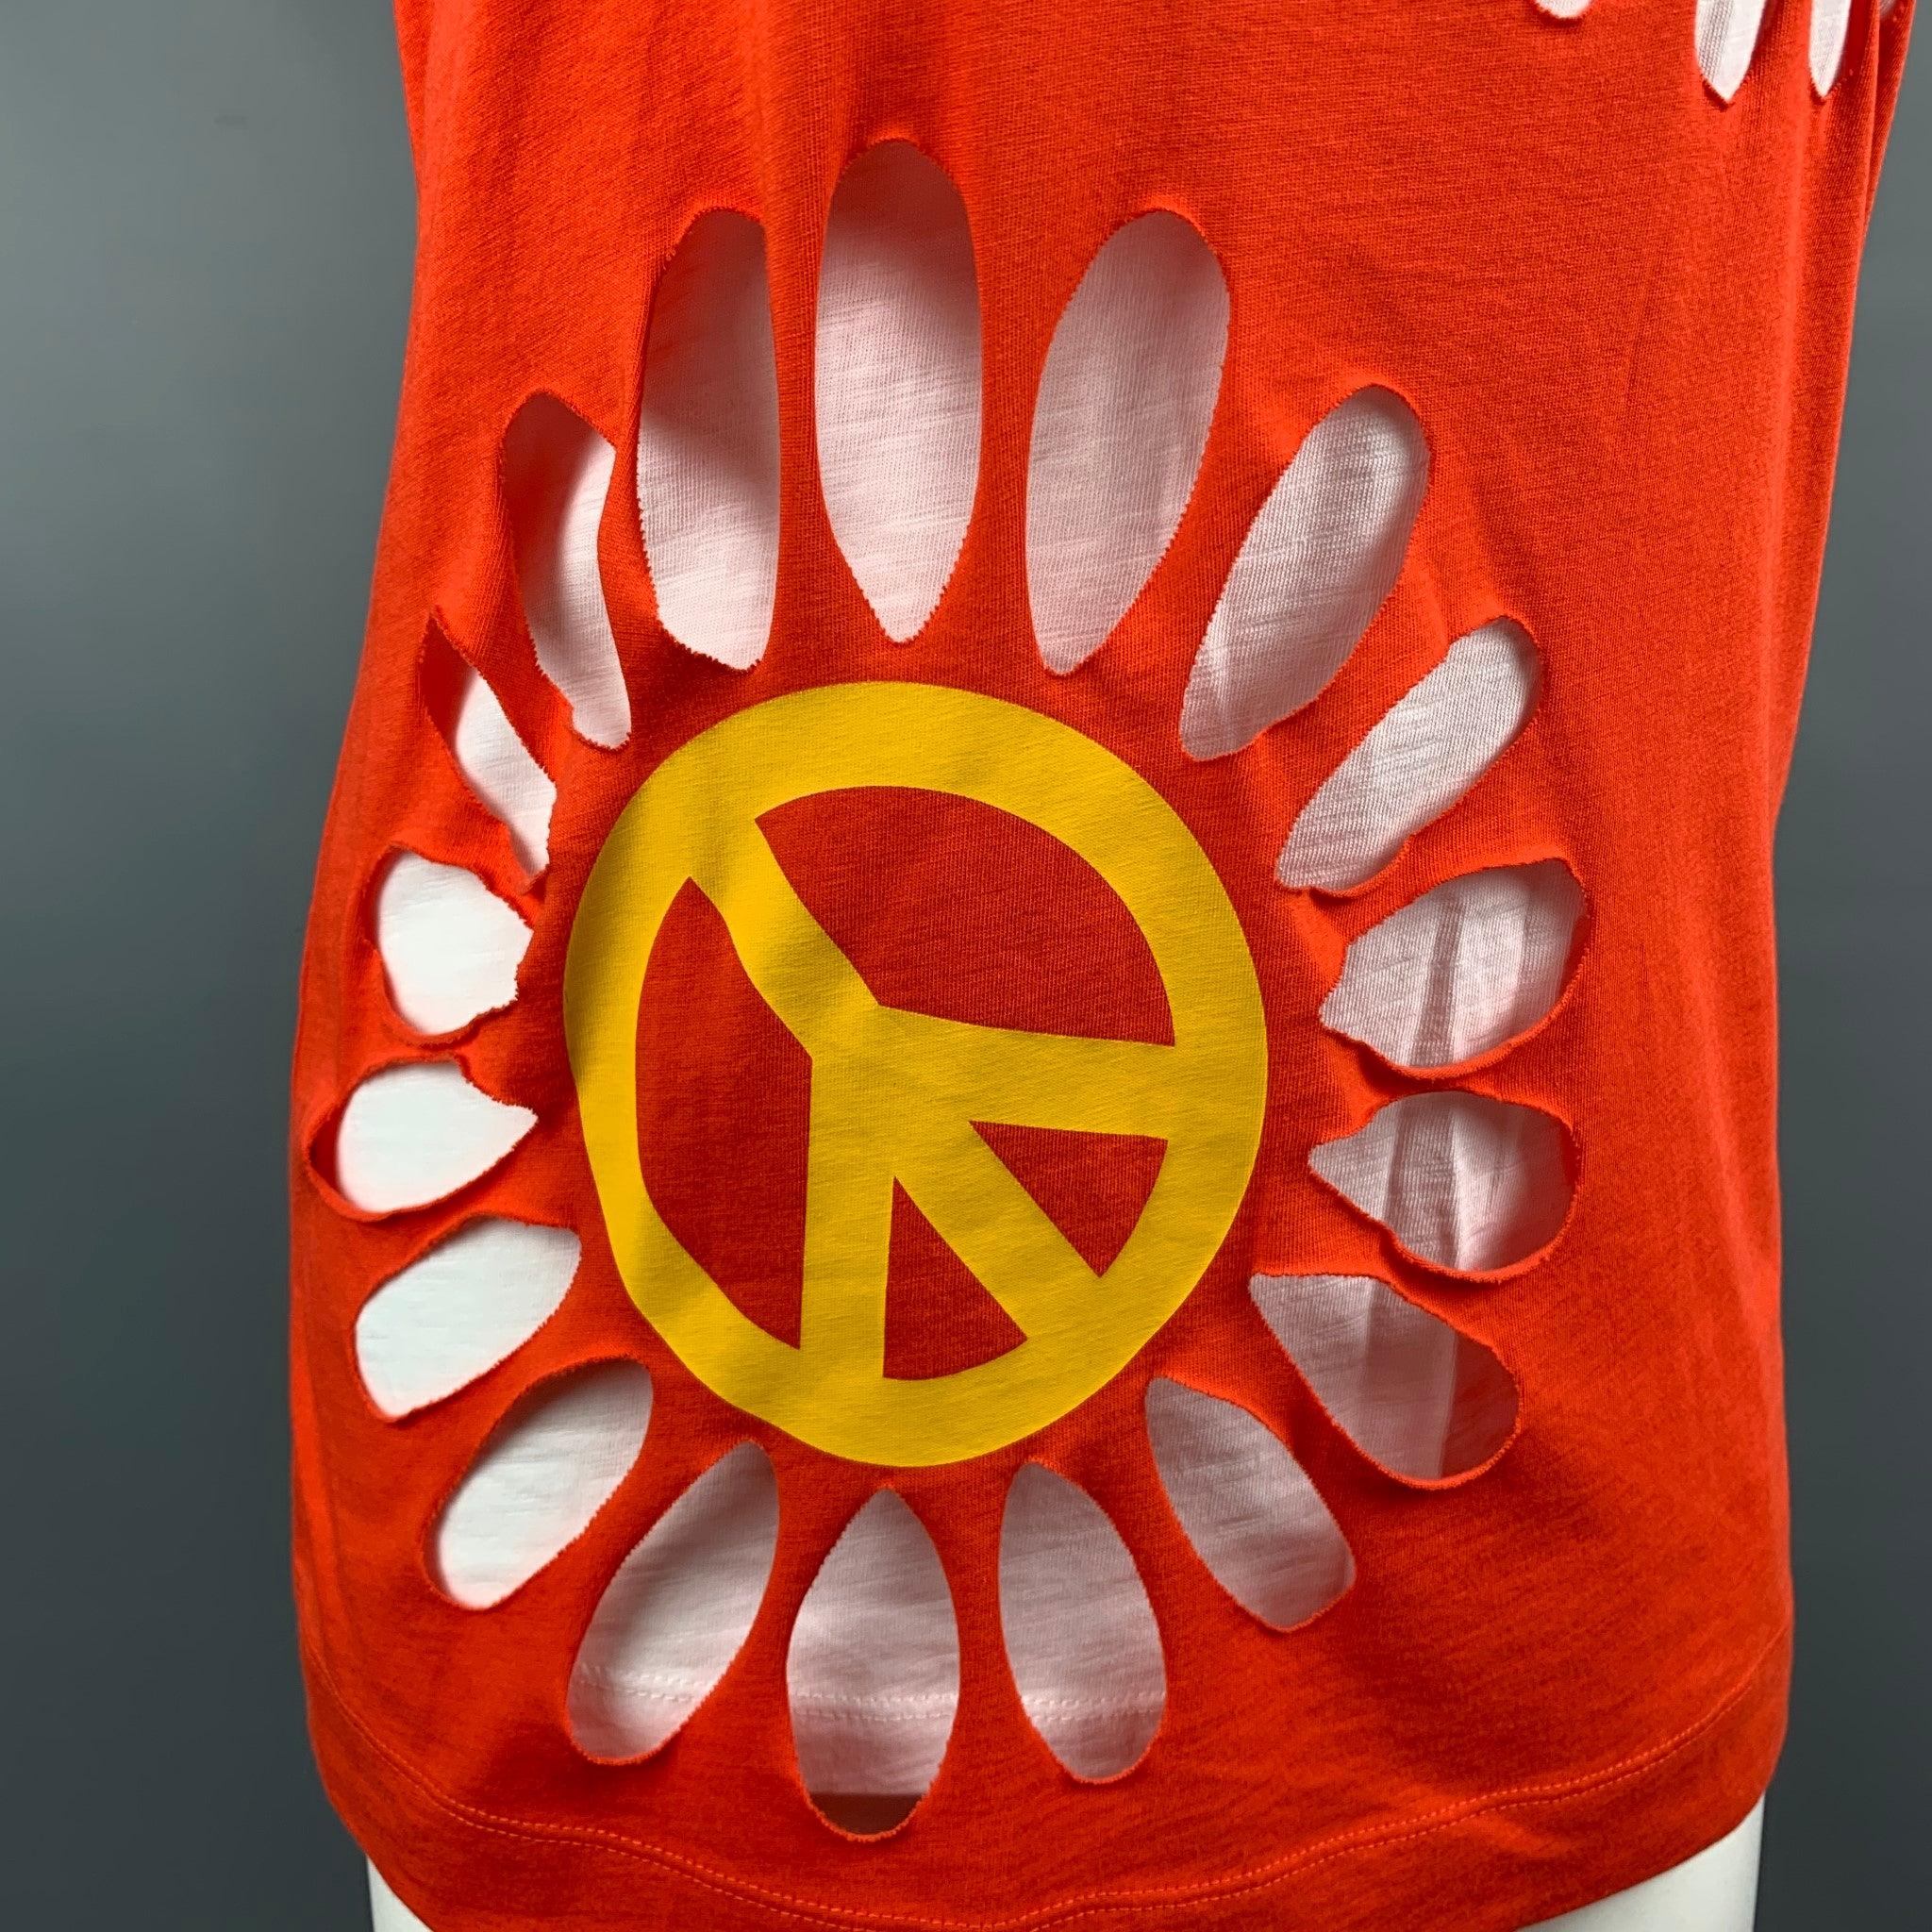 LOVE MOSCHINO Size 2 Red & White Cotton Cut Out T-Shirt In Excellent Condition For Sale In San Francisco, CA